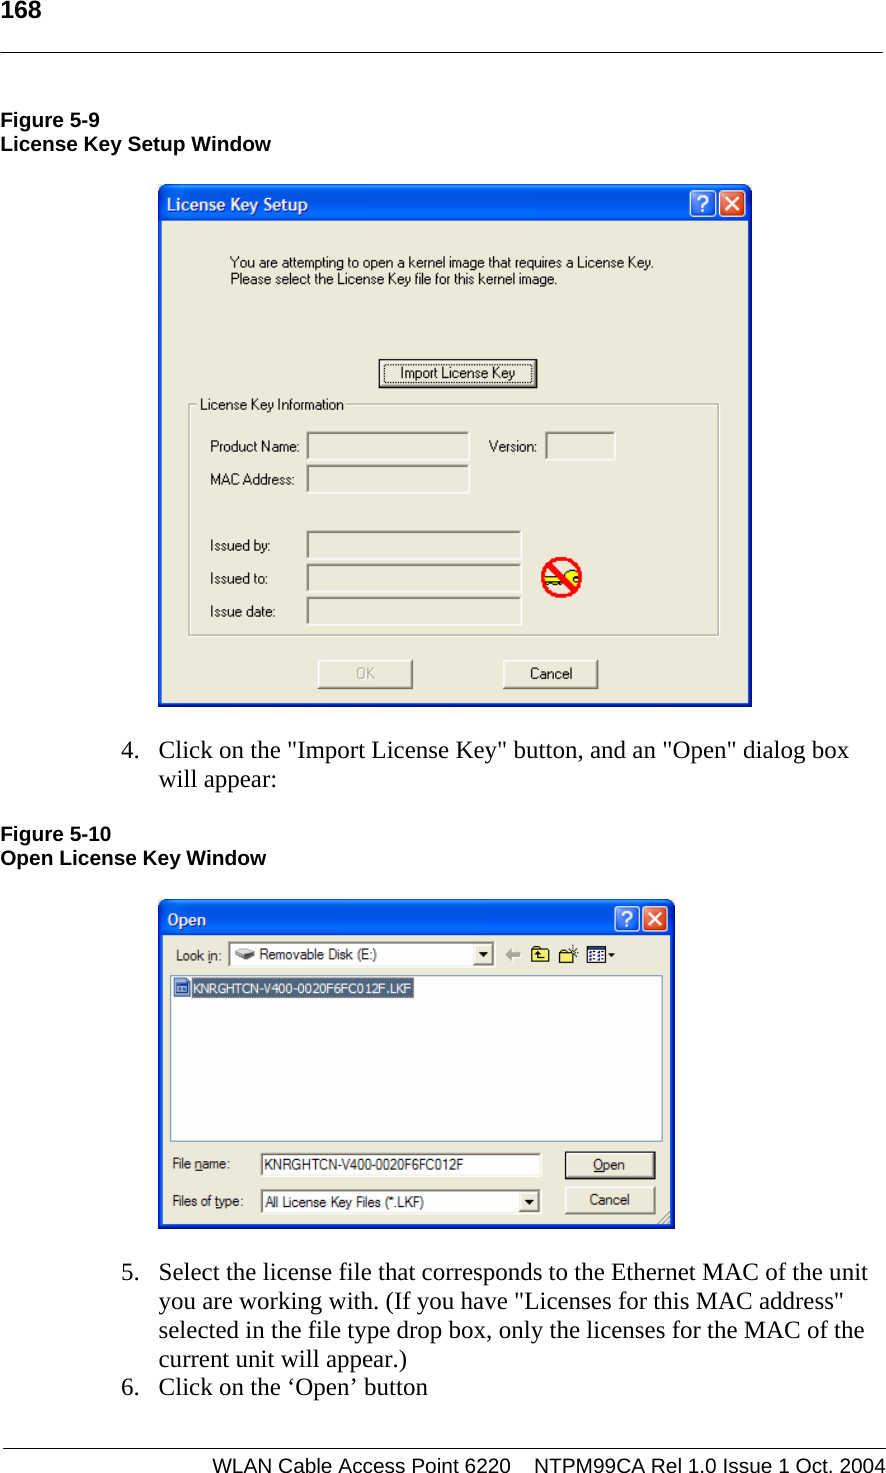   168    Figure 5-9 License Key Setup Window   4. Click on the &quot;Import License Key&quot; button, and an &quot;Open&quot; dialog box will appear: Figure 5-10 Open License Key Window  5. Select the license file that corresponds to the Ethernet MAC of the unit you are working with. (If you have &quot;Licenses for this MAC address&quot; selected in the file type drop box, only the licenses for the MAC of the current unit will appear.) 6. Click on the ‘Open’ button WLAN Cable Access Point 6220    NTPM99CA Rel 1.0 Issue 1 Oct. 2004